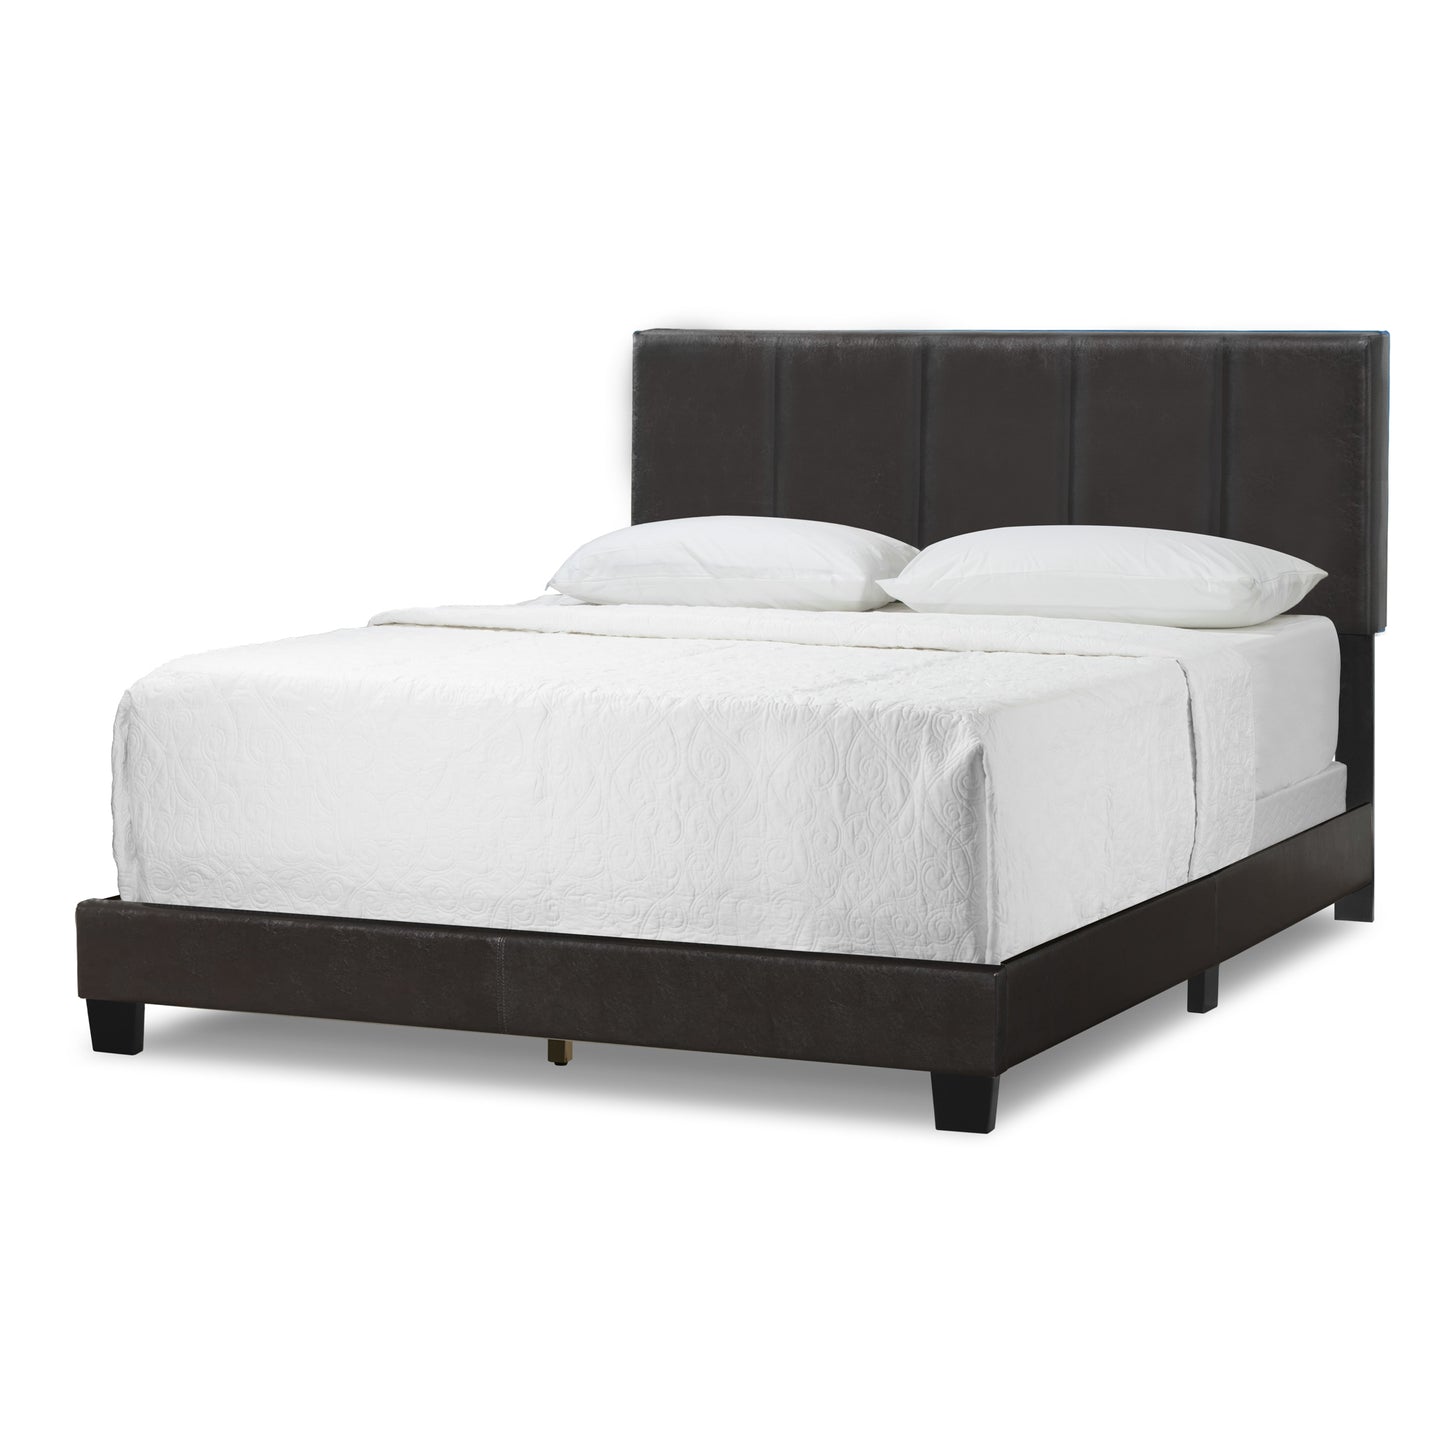 Arty Black Brown Faux Leather Twin Bed with Line Stitch Tufting